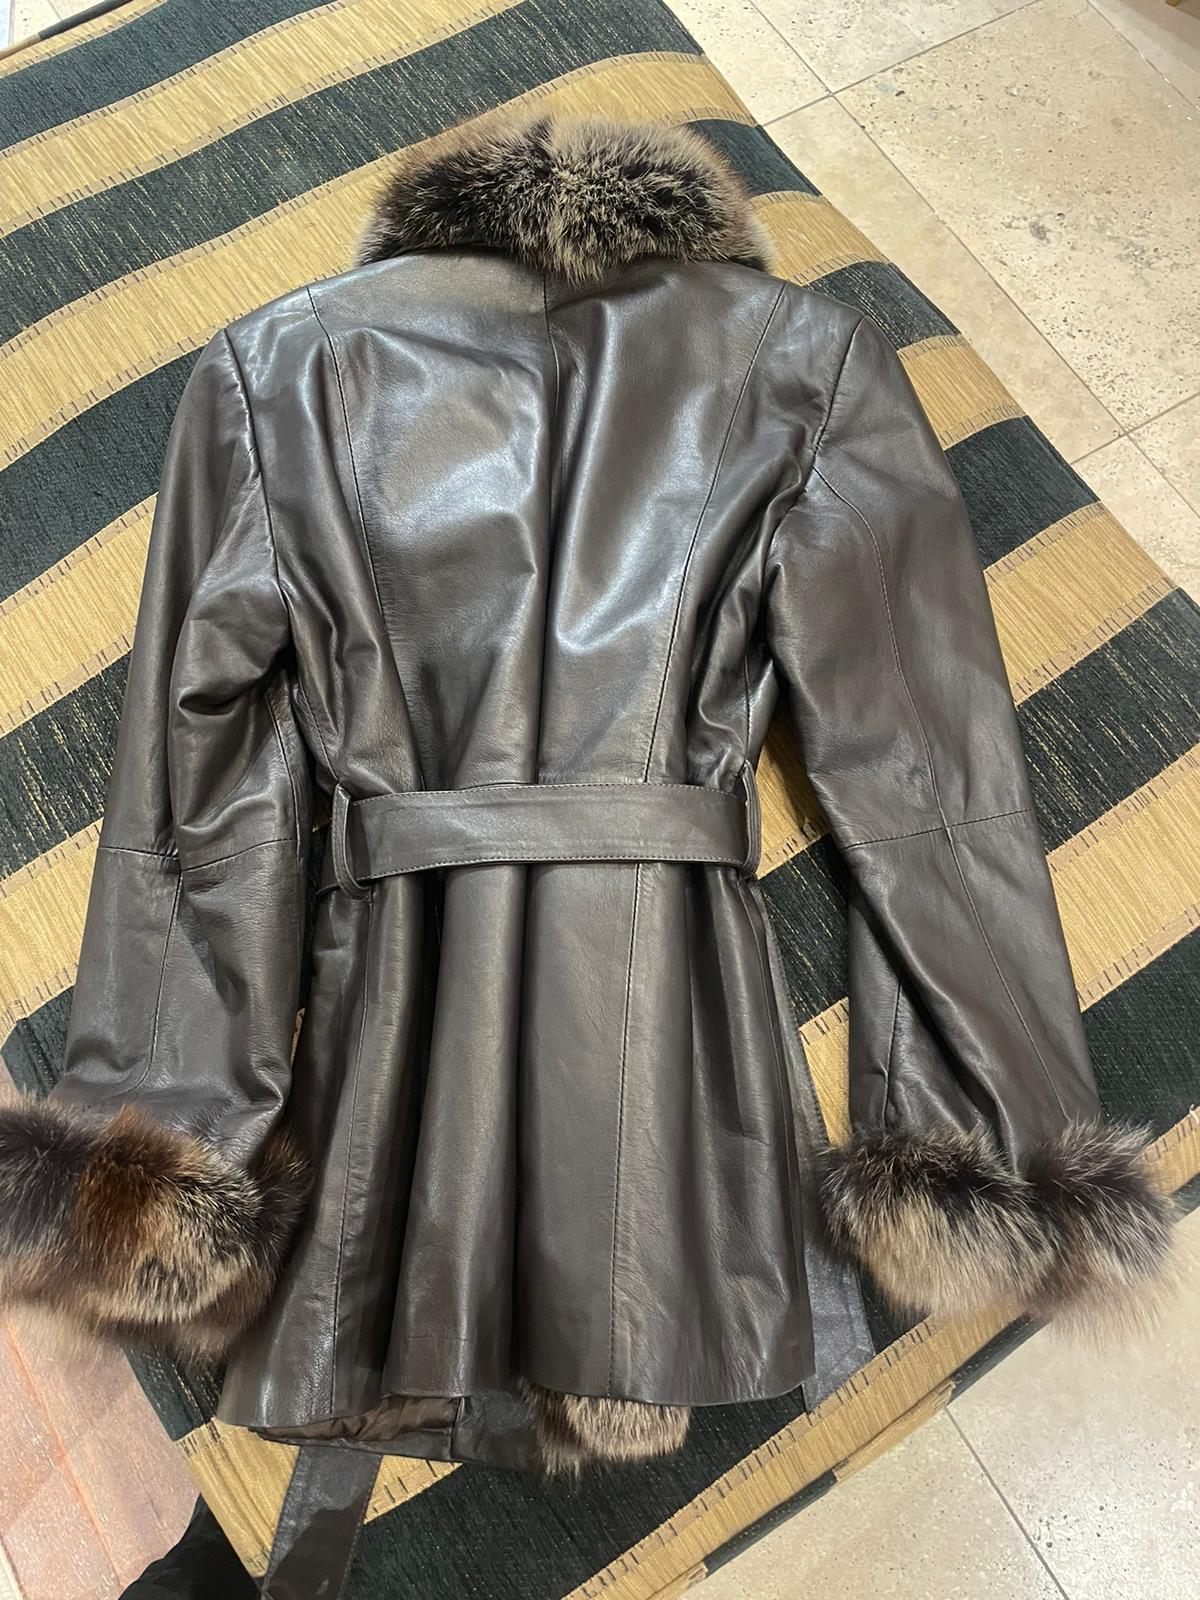 Vintage Long brown leather coat with real fur collar size 6-8